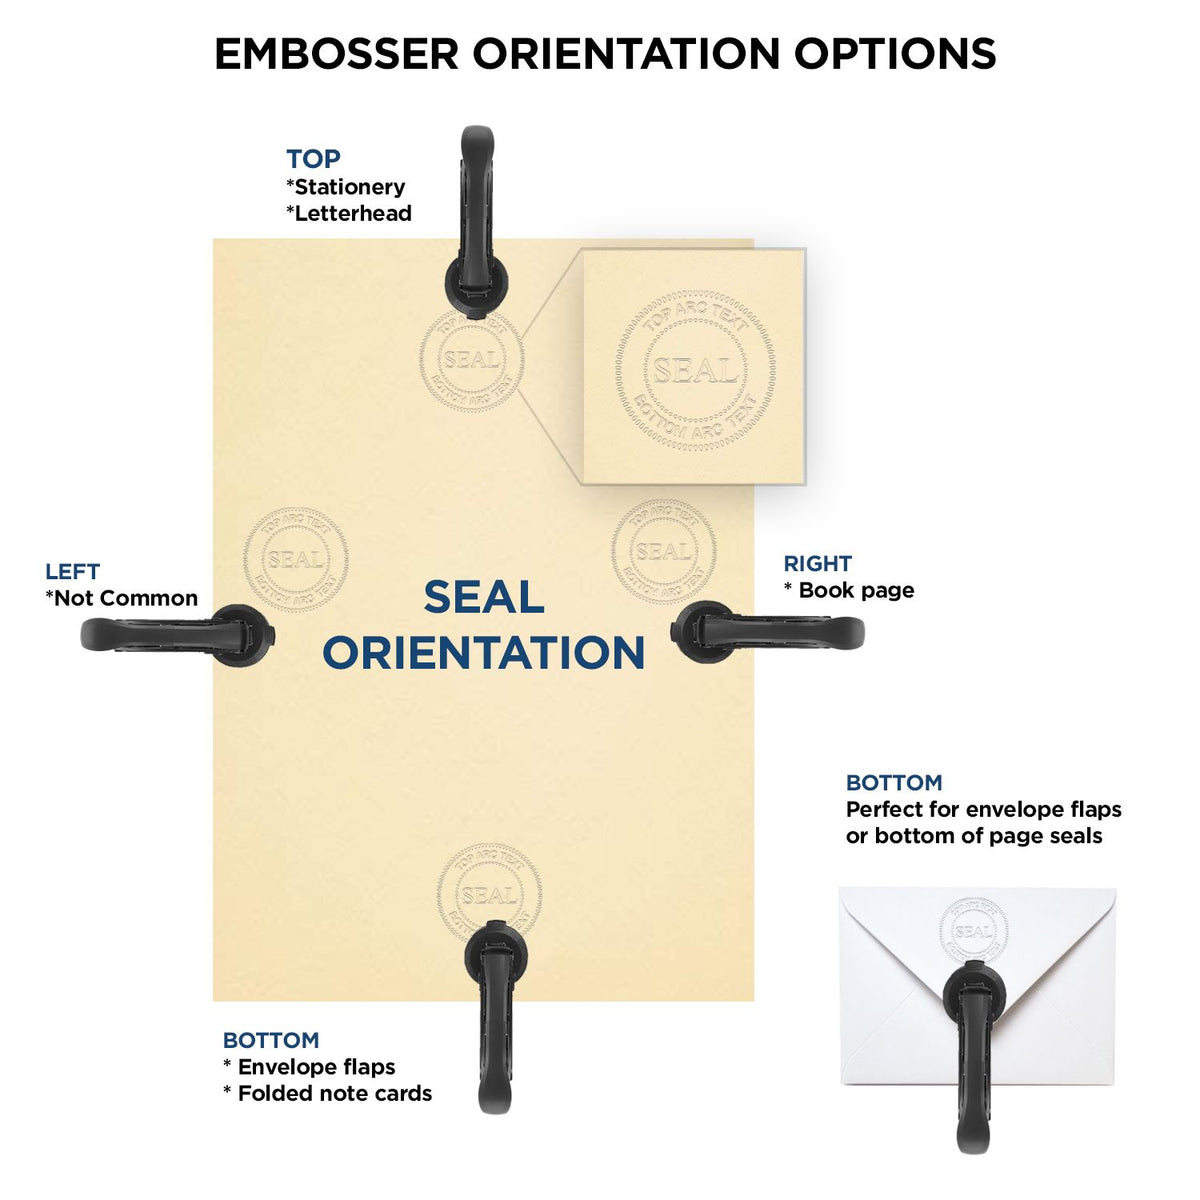 An infographic for the Handheld Utah Architect Seal Embosser showing embosser orientation, this is showing examples of a top, bottom, right and left insert.